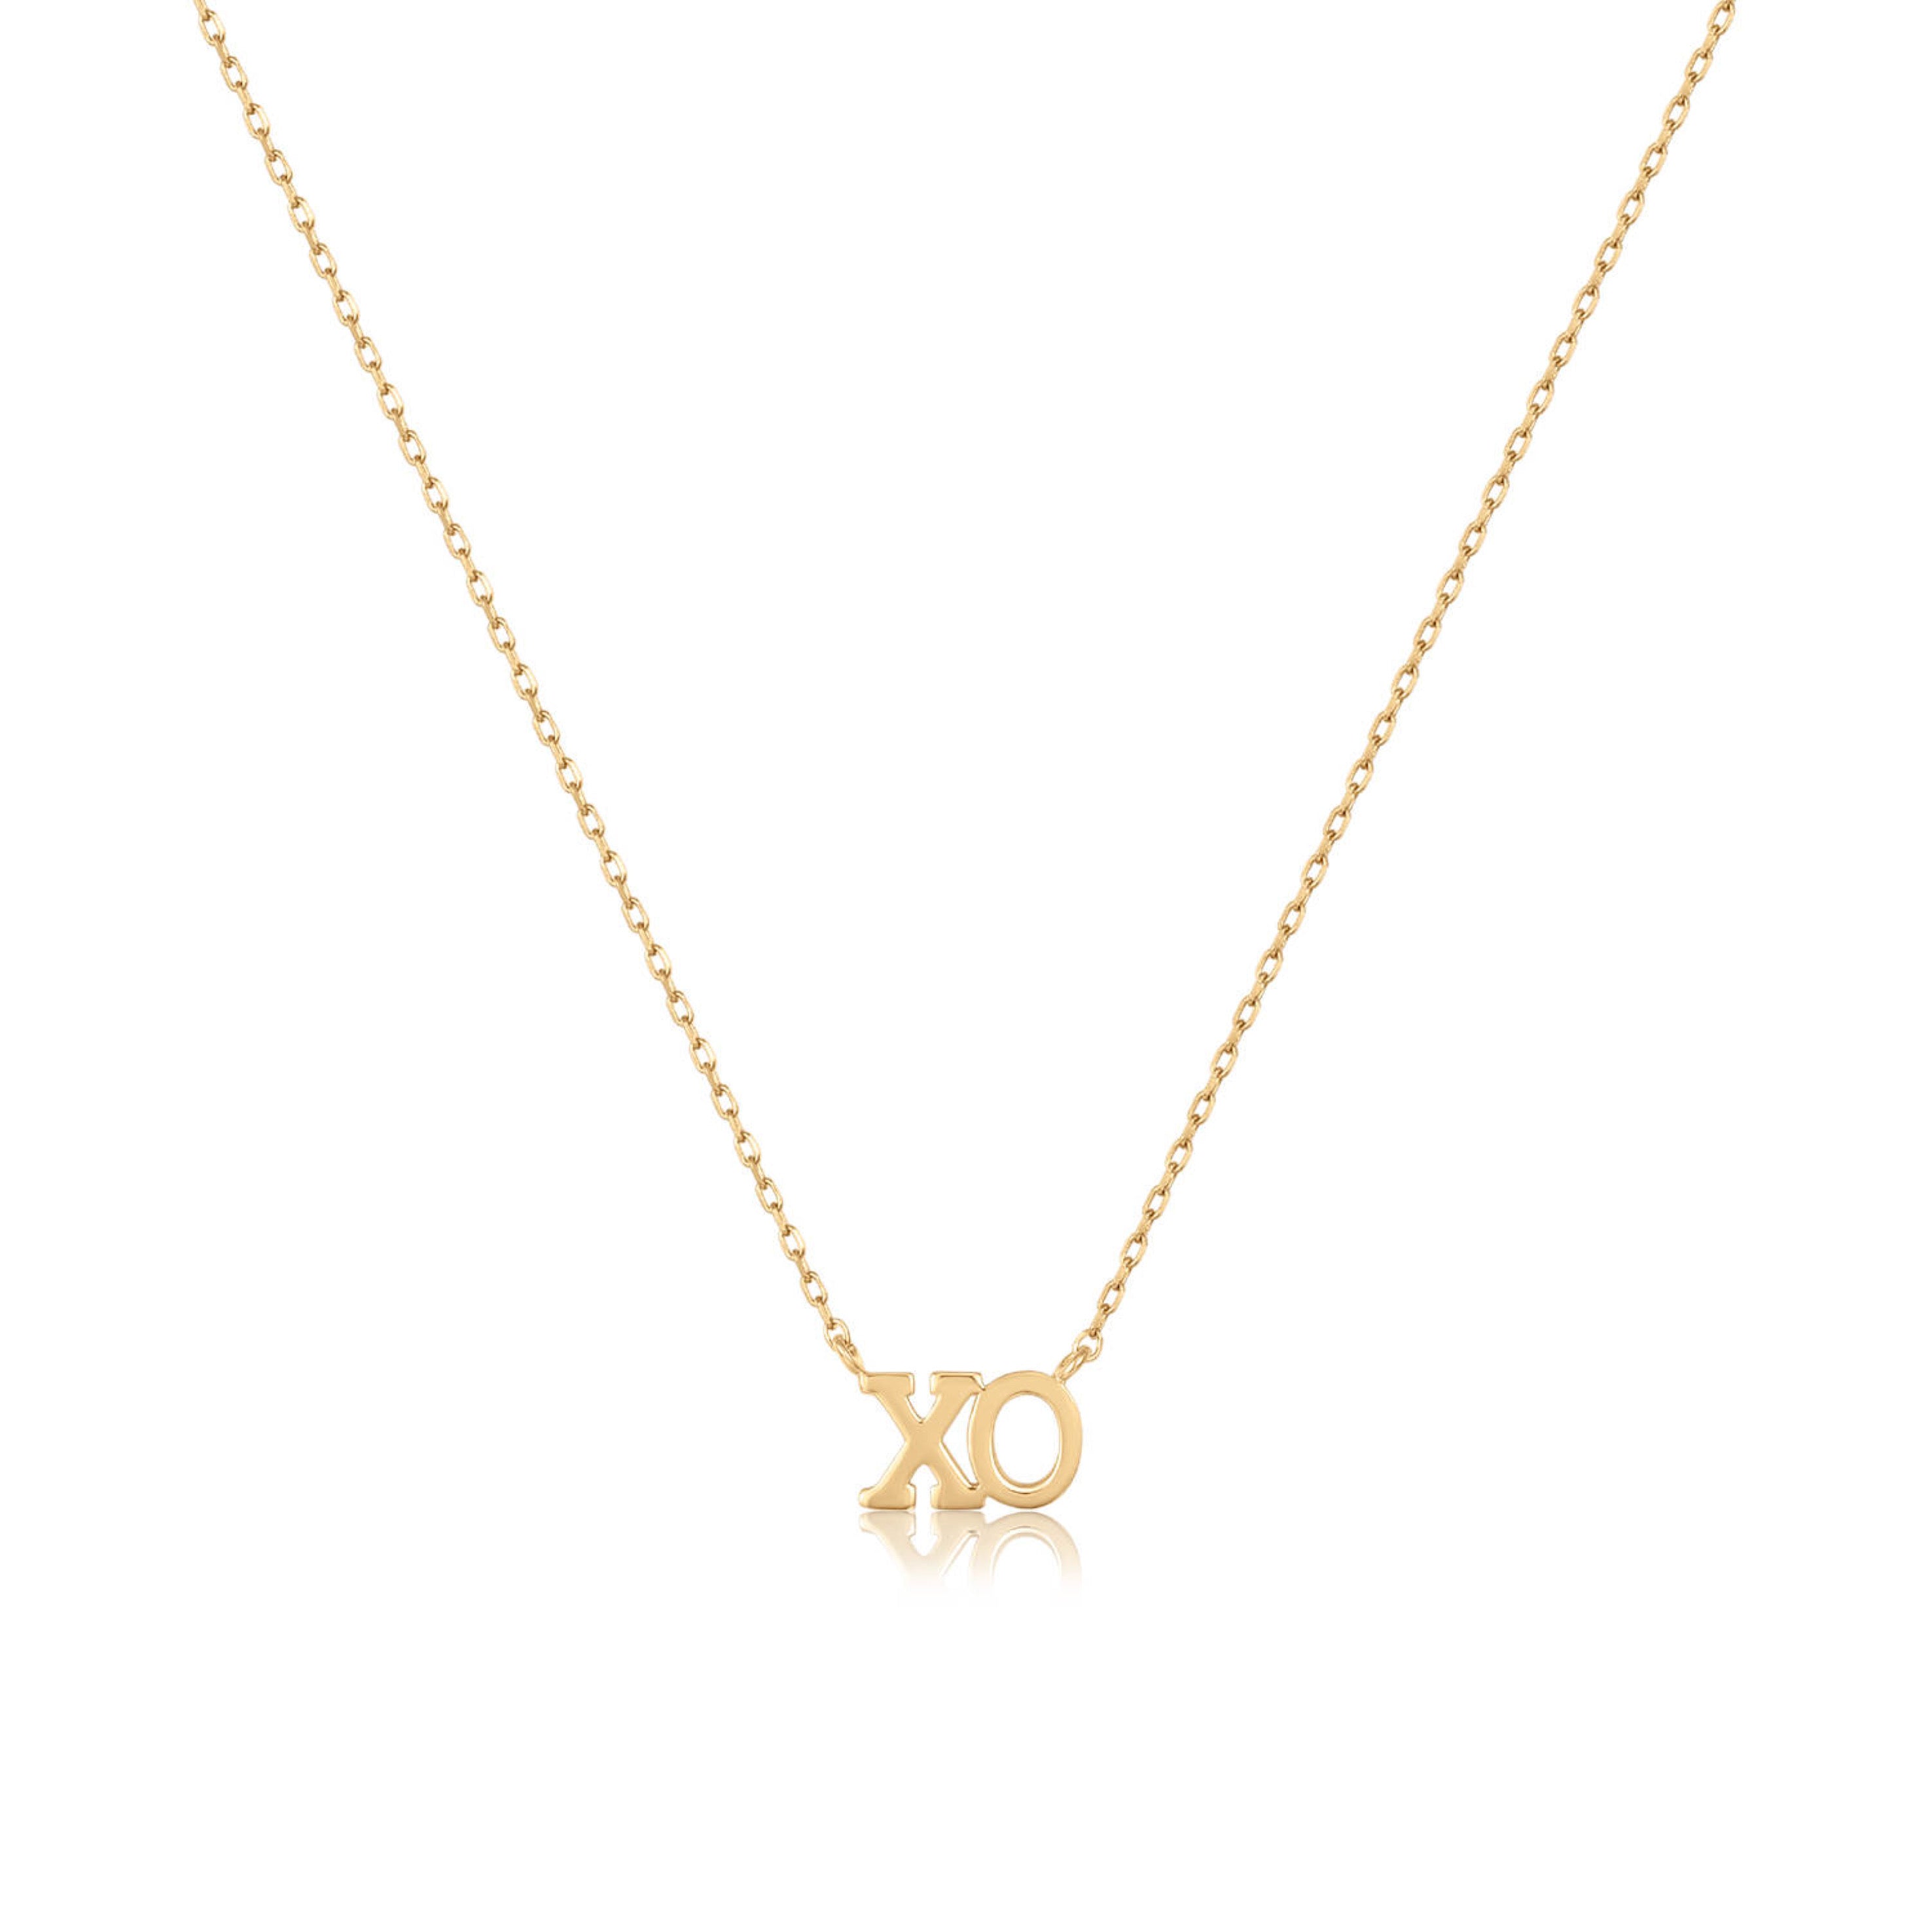 ALOR Grey Chain Expressions of Love XO Necklace with 14kt Yellow Gold &  Diamonds – Luxury Designer & Fine Jewelry - ALOR